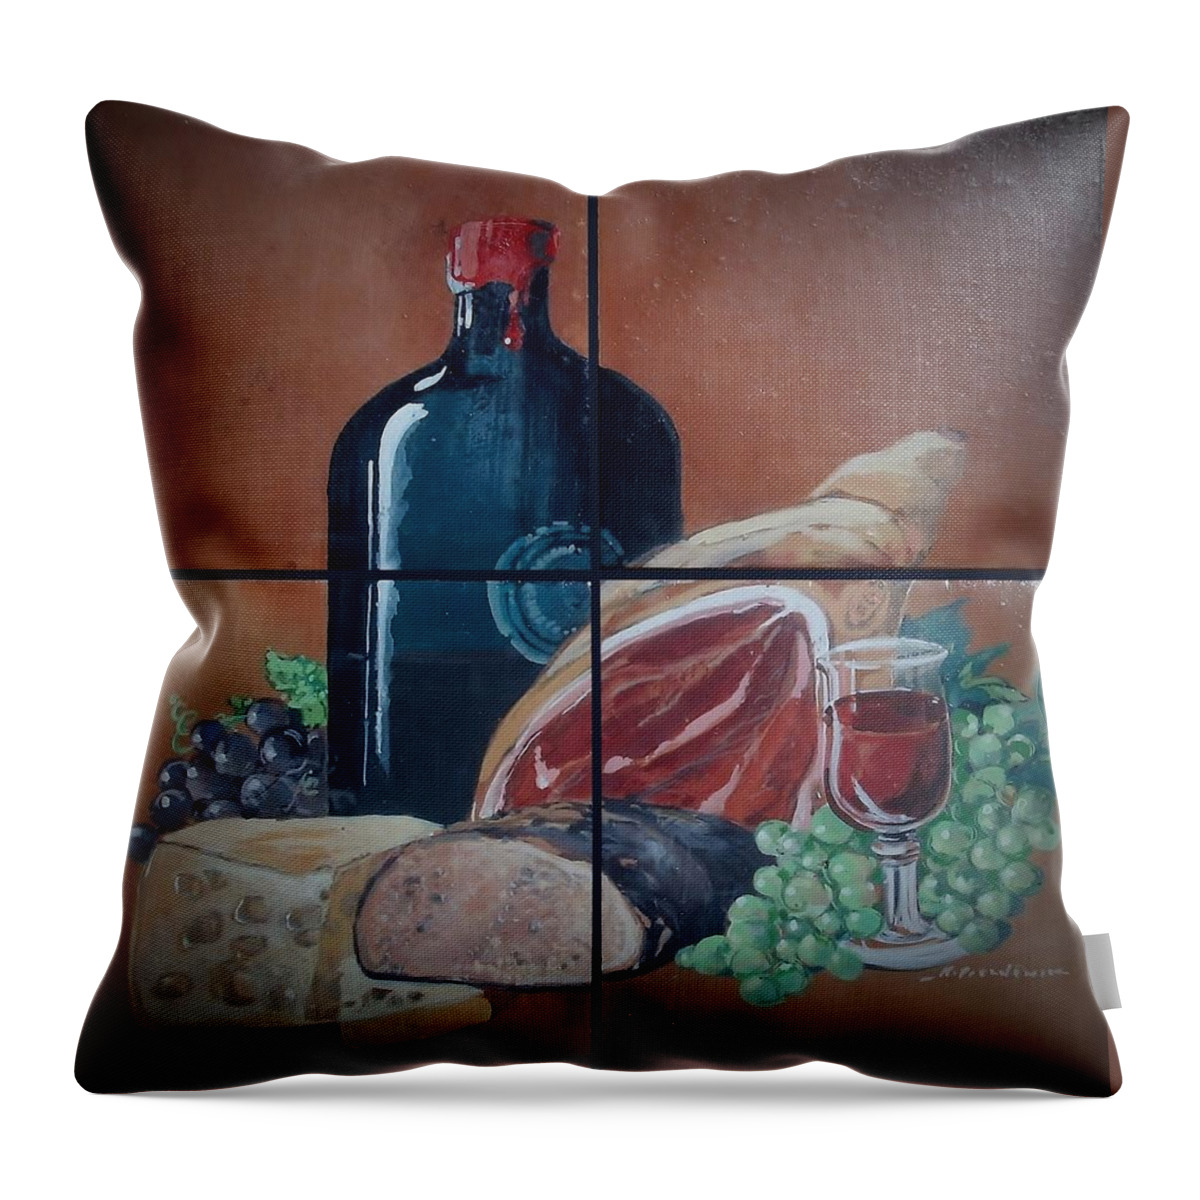 Wine Throw Pillow featuring the ceramic art Wine And Dine by Andrew Drozdowicz